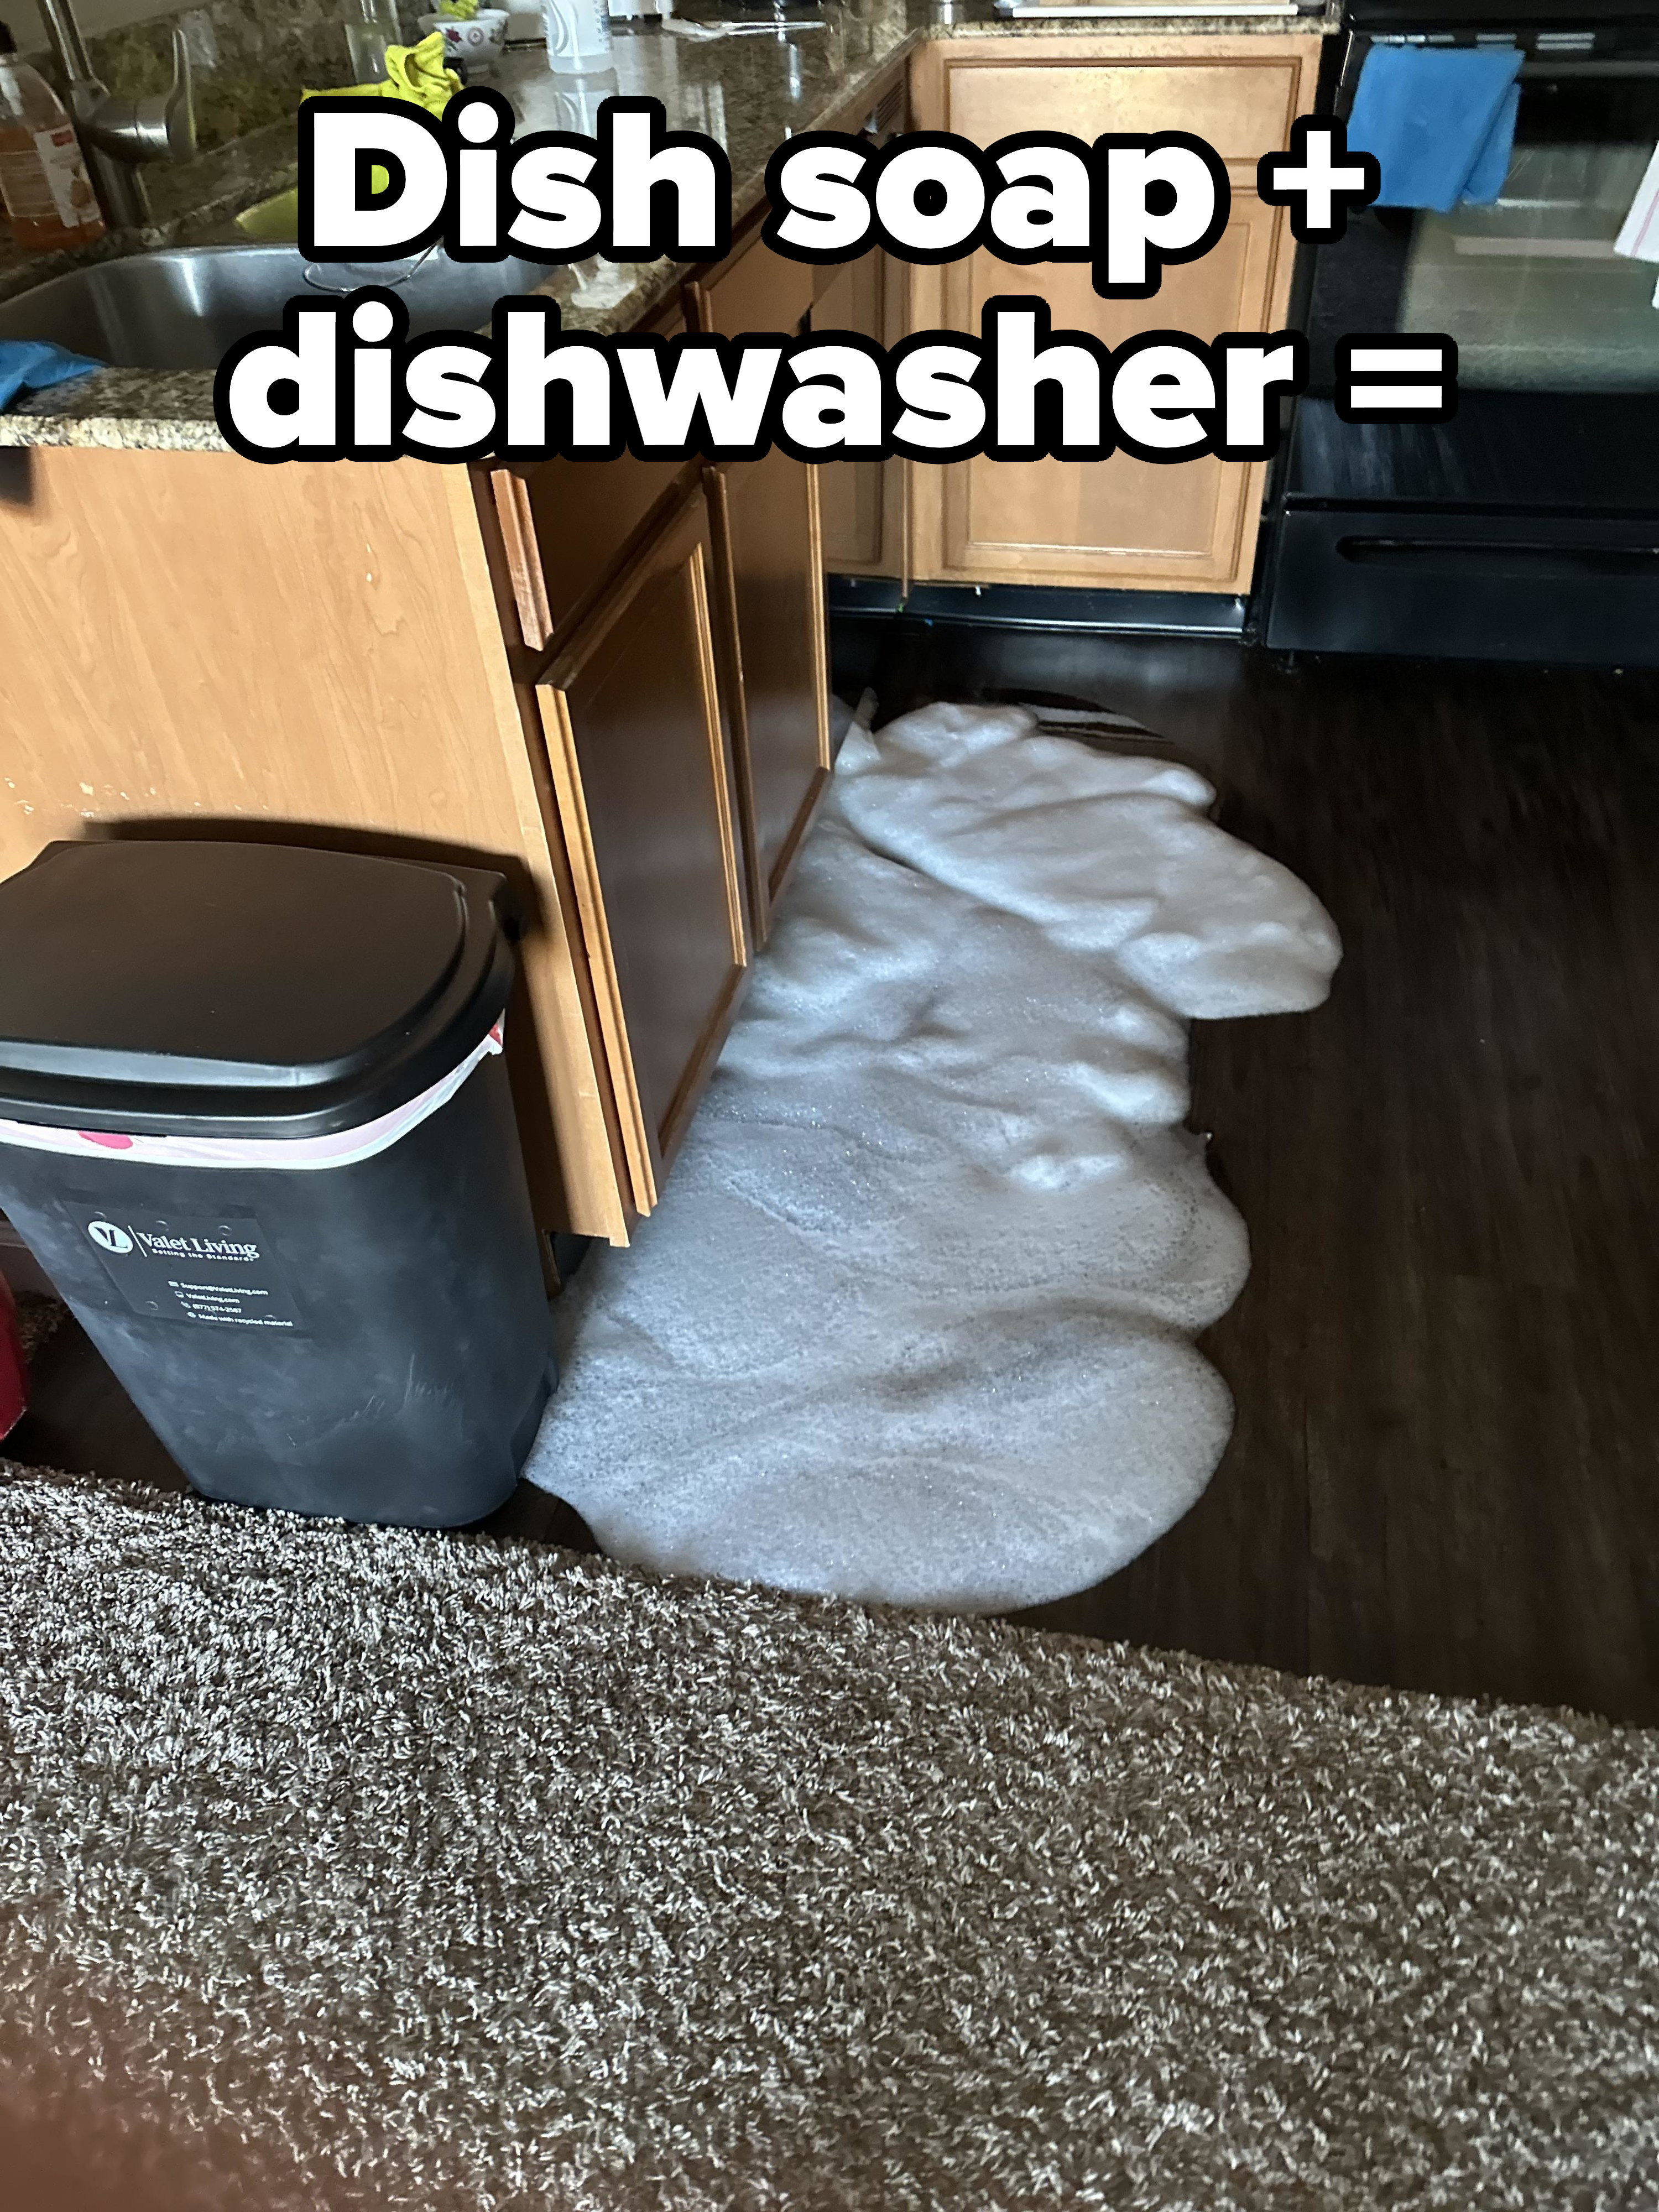 Dishwasher overflowing with soapy water